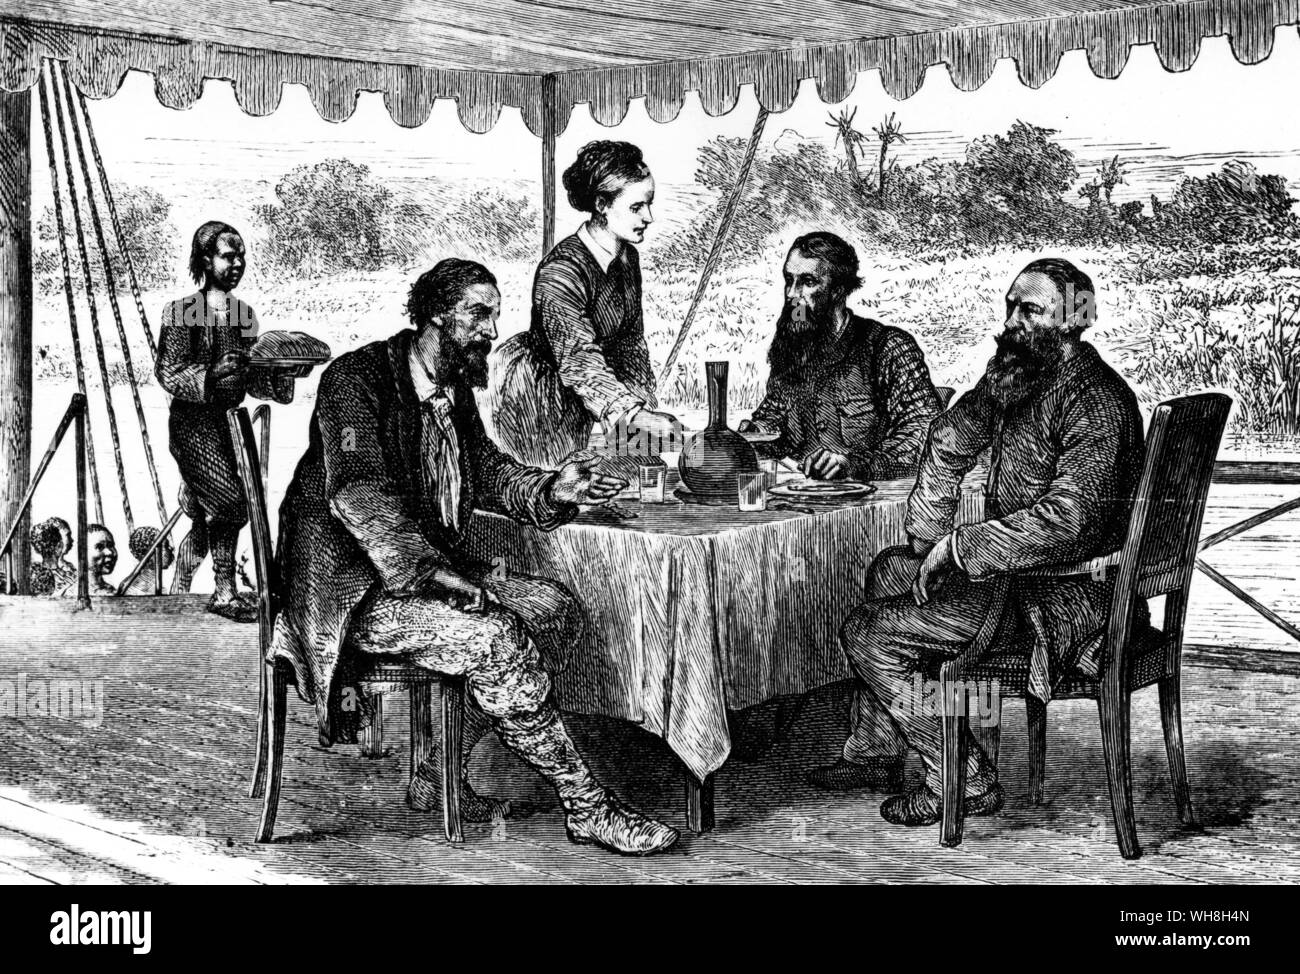 Tea at Gondokoro - Speke and Grant are entertained by the Bakers. John Hanning Speke (1827-1864) was an officer in the British Indian army, who made three voyages of exploration to Africa. James Augustus Grant, (1827-1892) was a Scottish explorer of eastern equatorial Africa. In 1860, Grant joined Speke in the memorable expedition which solved the problem of the Nile sources. The African Adventure - A History of Africa's Explorers by Timothy Severin, page 231. . Stock Photo